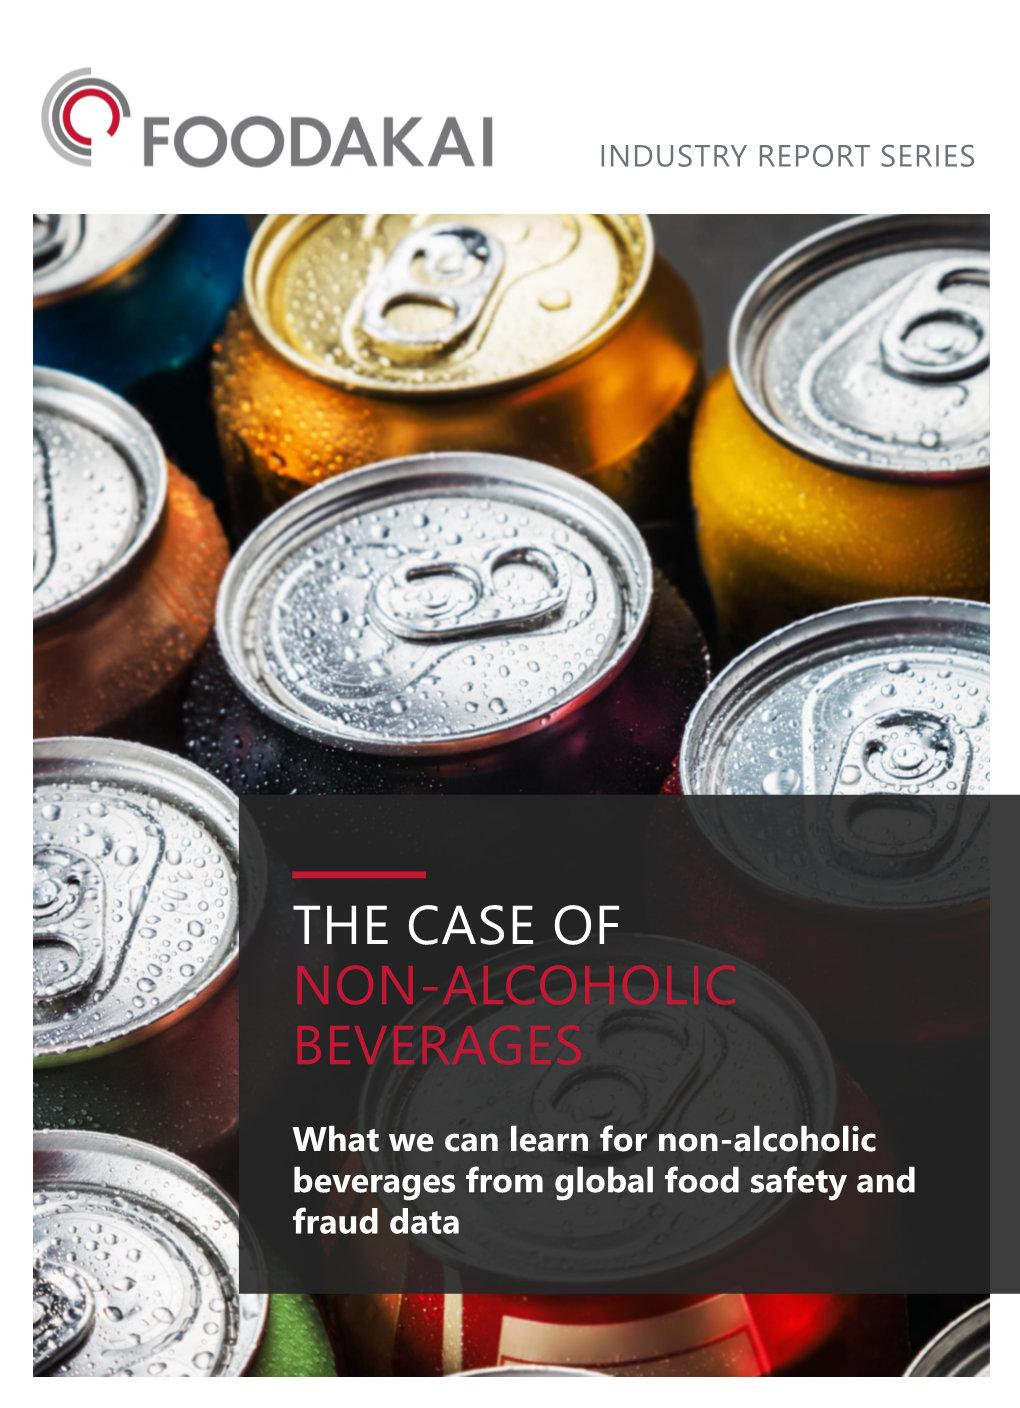 The Case of Non-Alcoholic Beverages